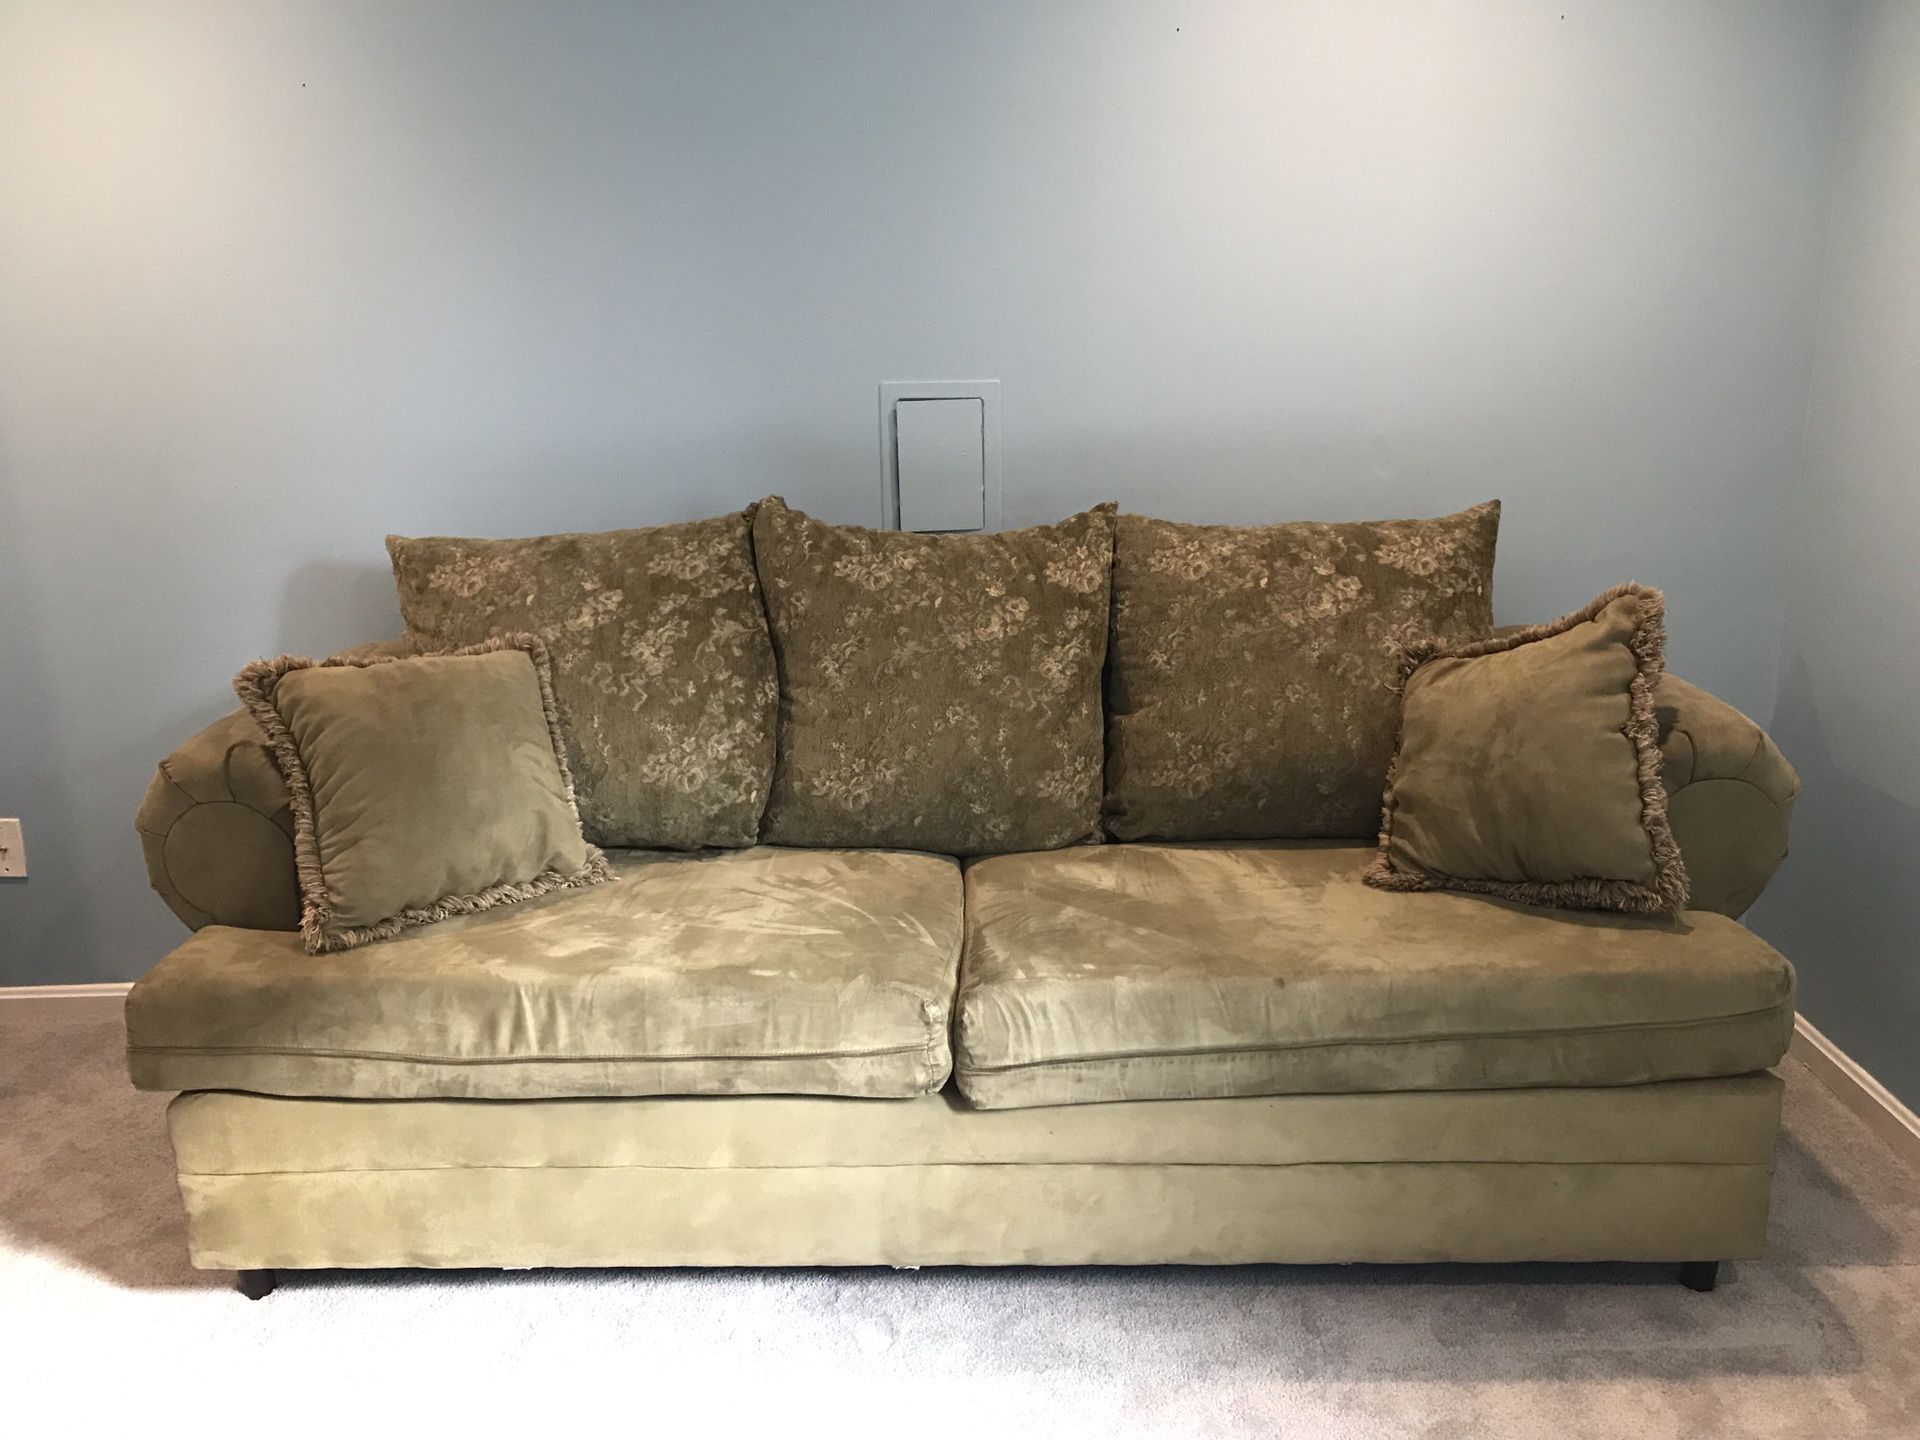 Suede Couch 80x30x34 and Suede Loveseat 63x30x34